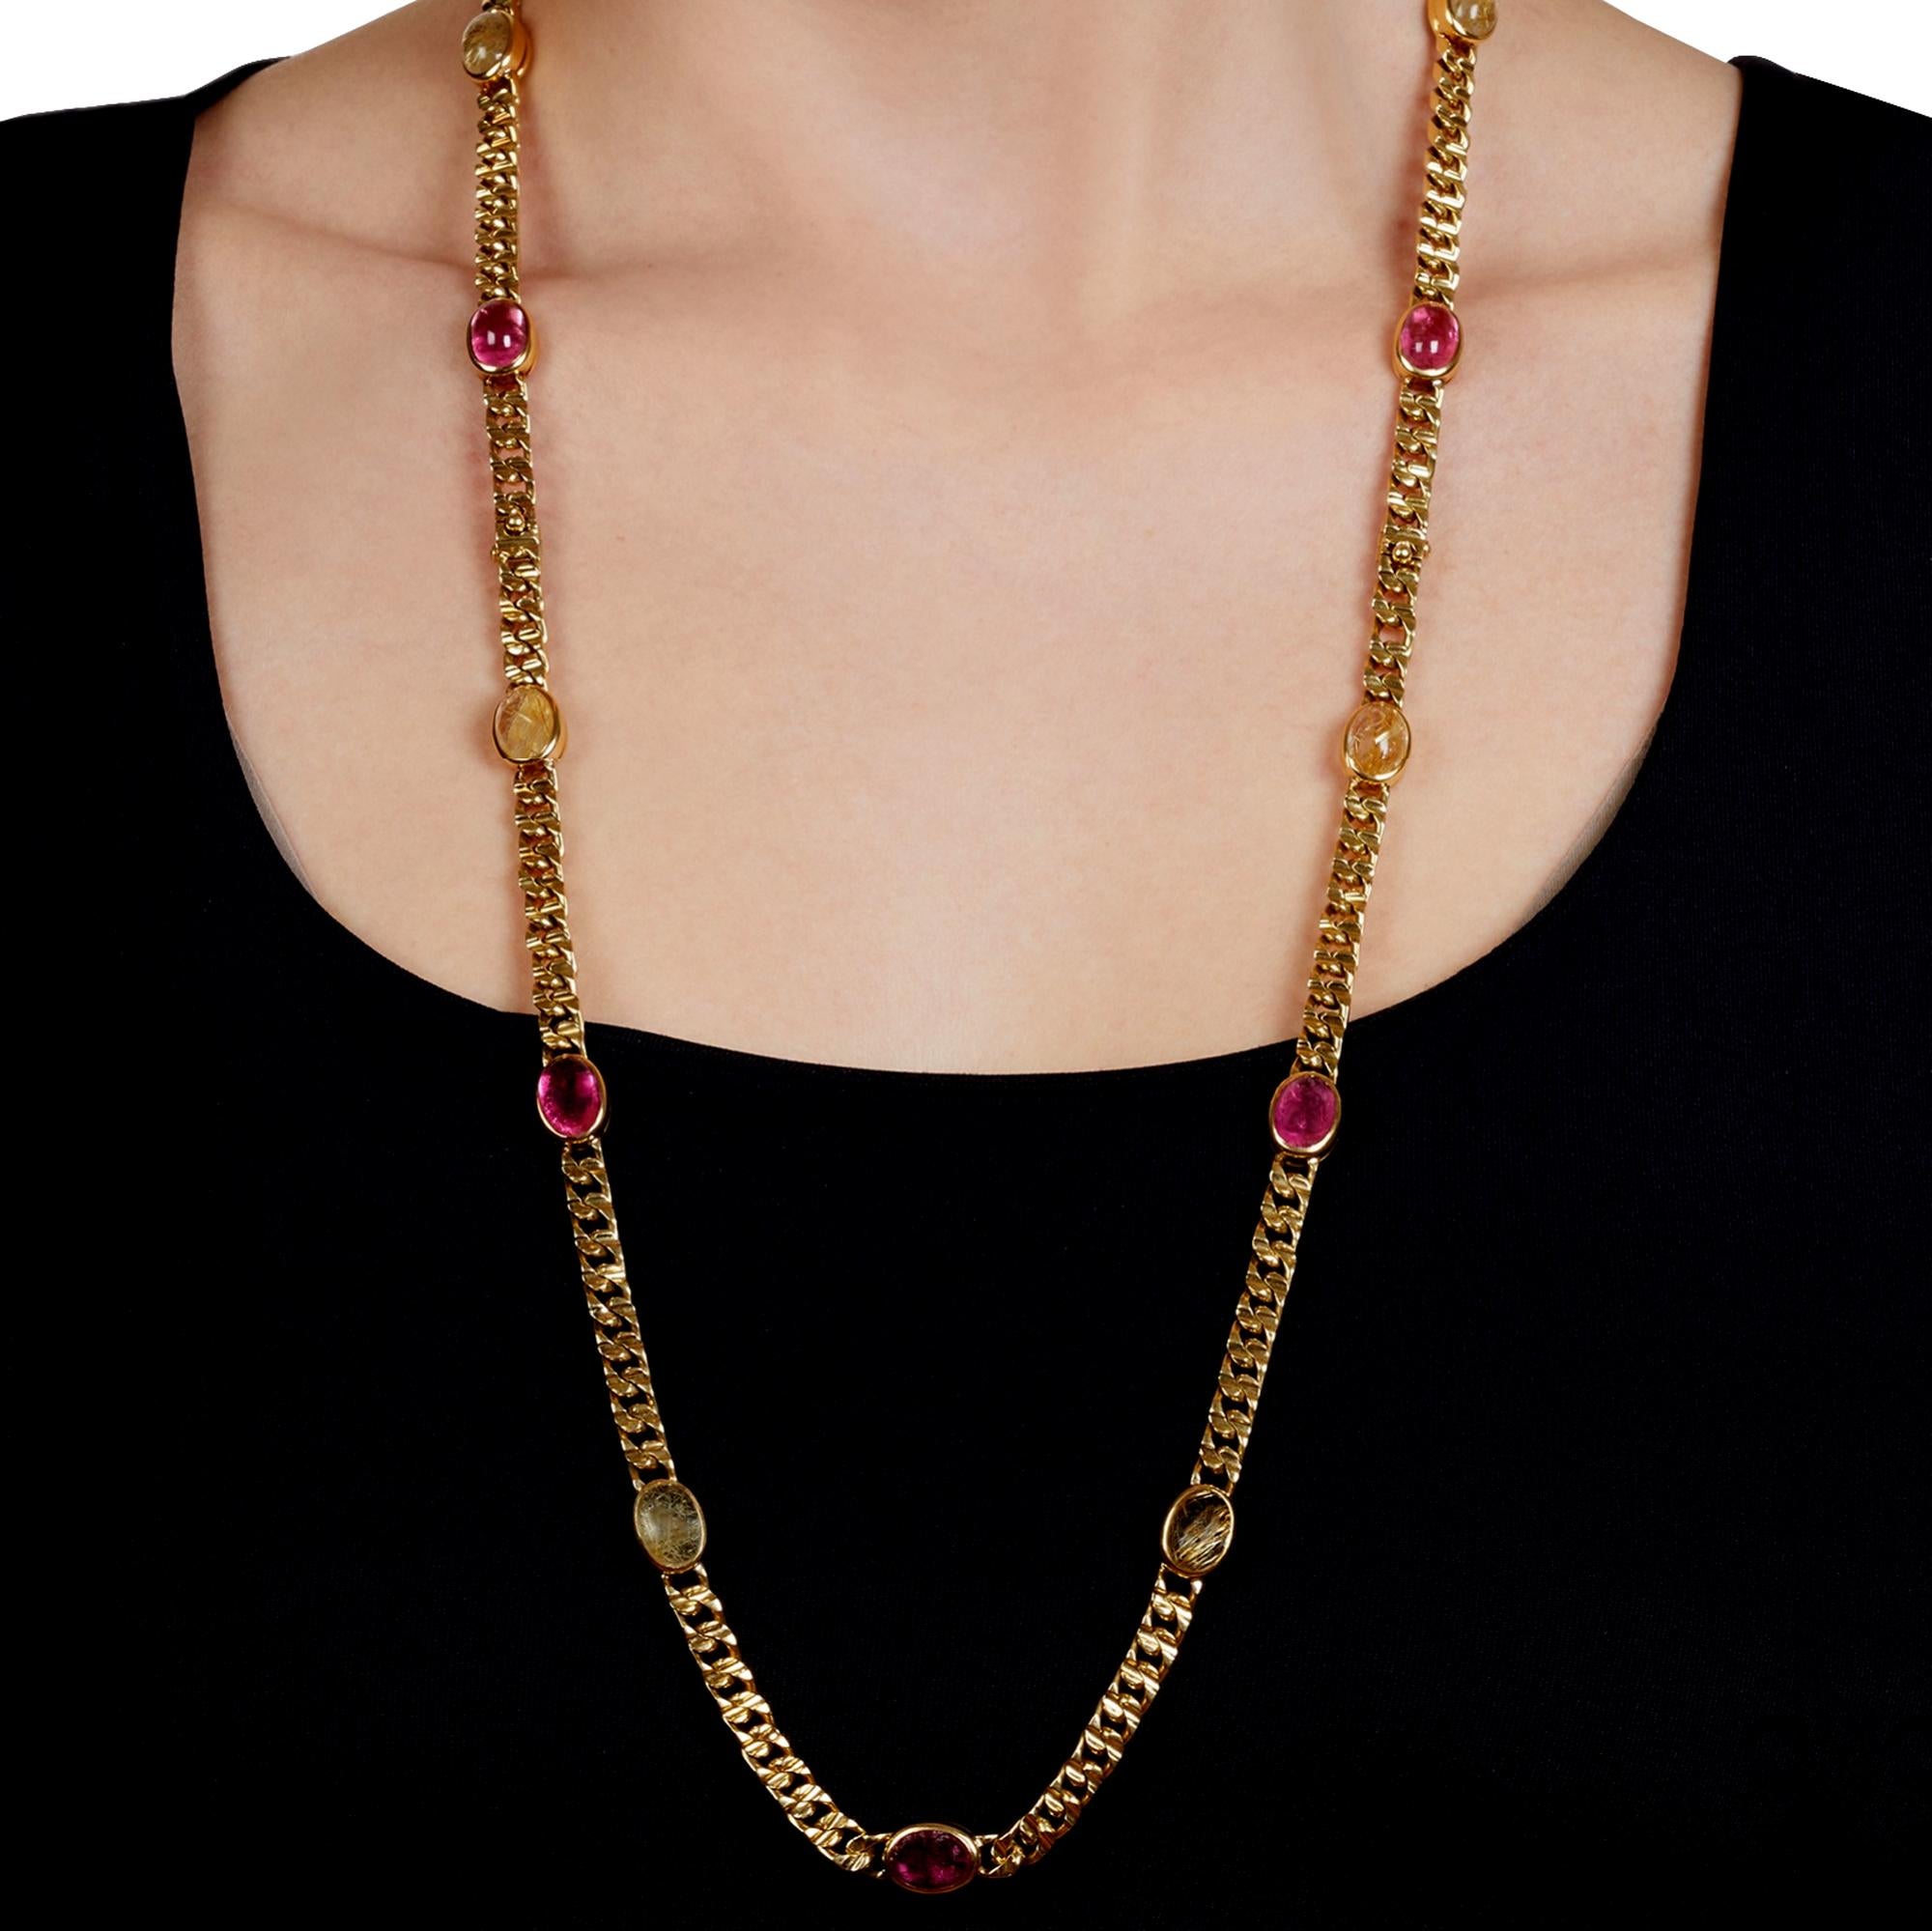 Bvlgari Vintage Pink Tourmaline Sautoir Yellow Gold Necklace In Good Condition For Sale In Feasterville, PA